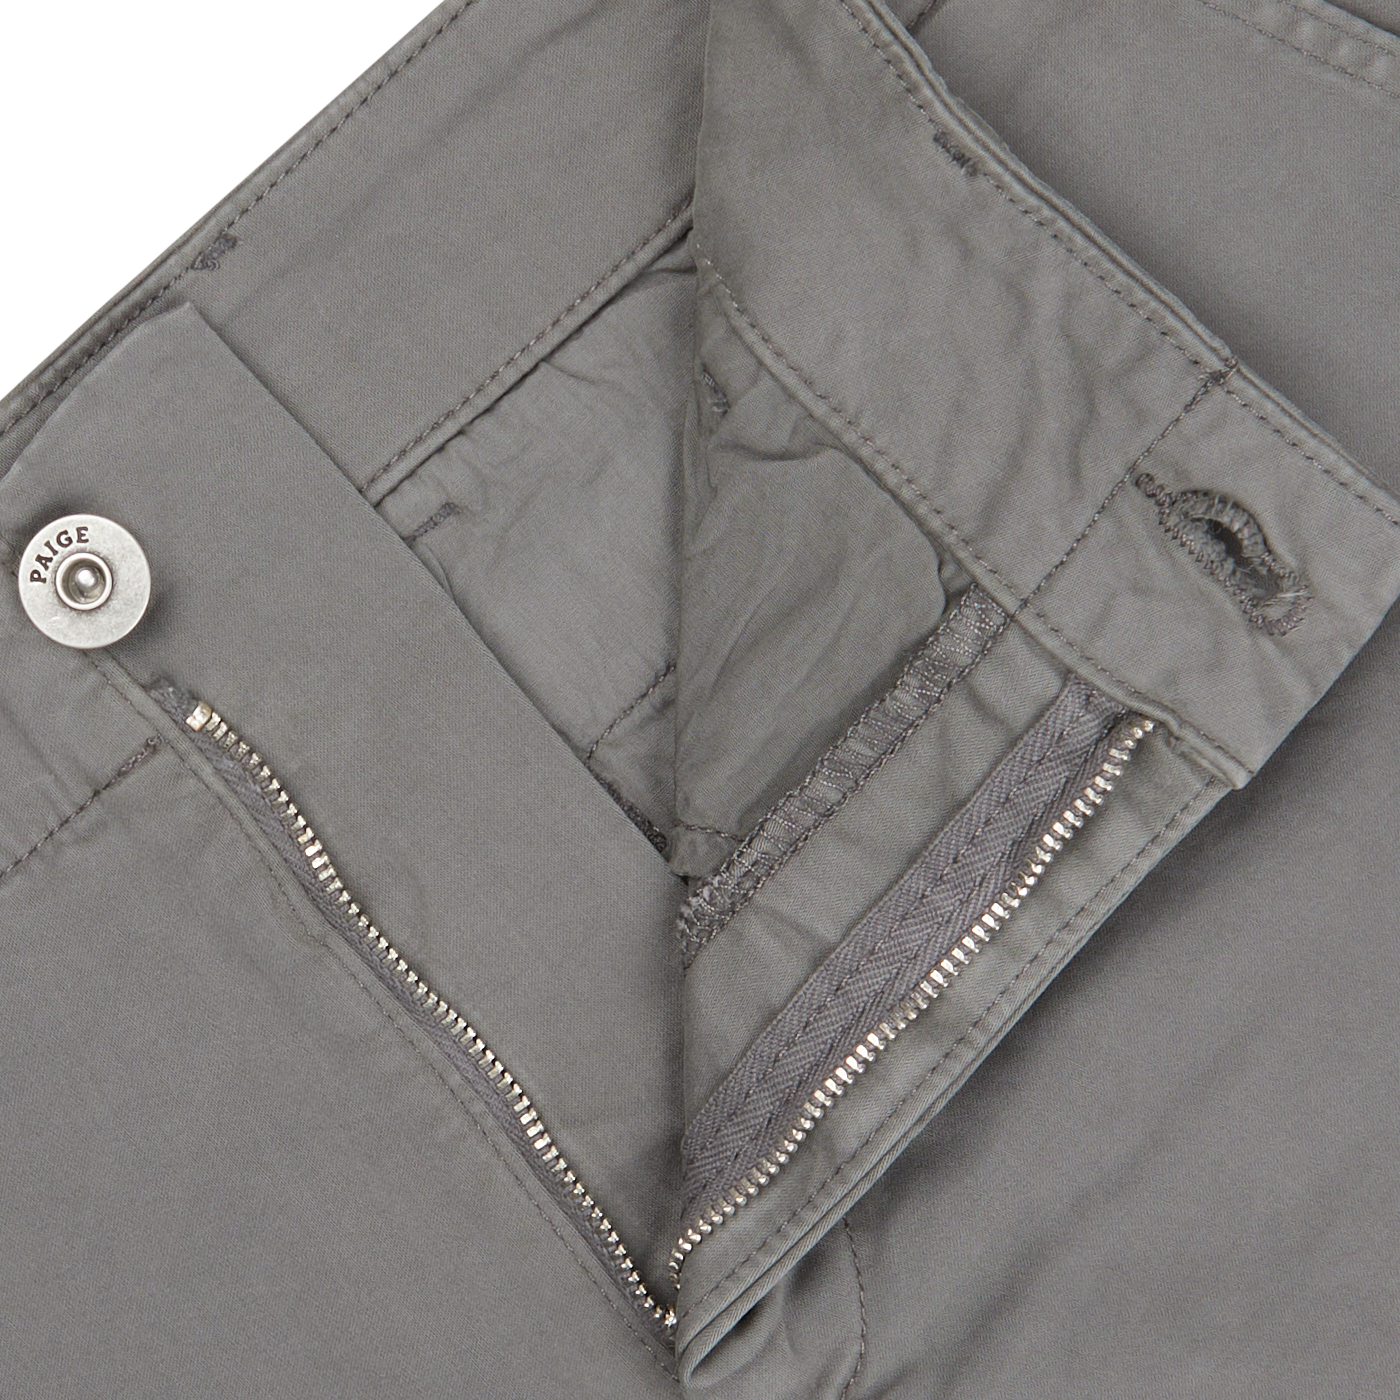 Close-up of a slate grey Paige Phillips jacket with a visible zipper pocket, stitched details, and a button closure, crafted from cotton blend.